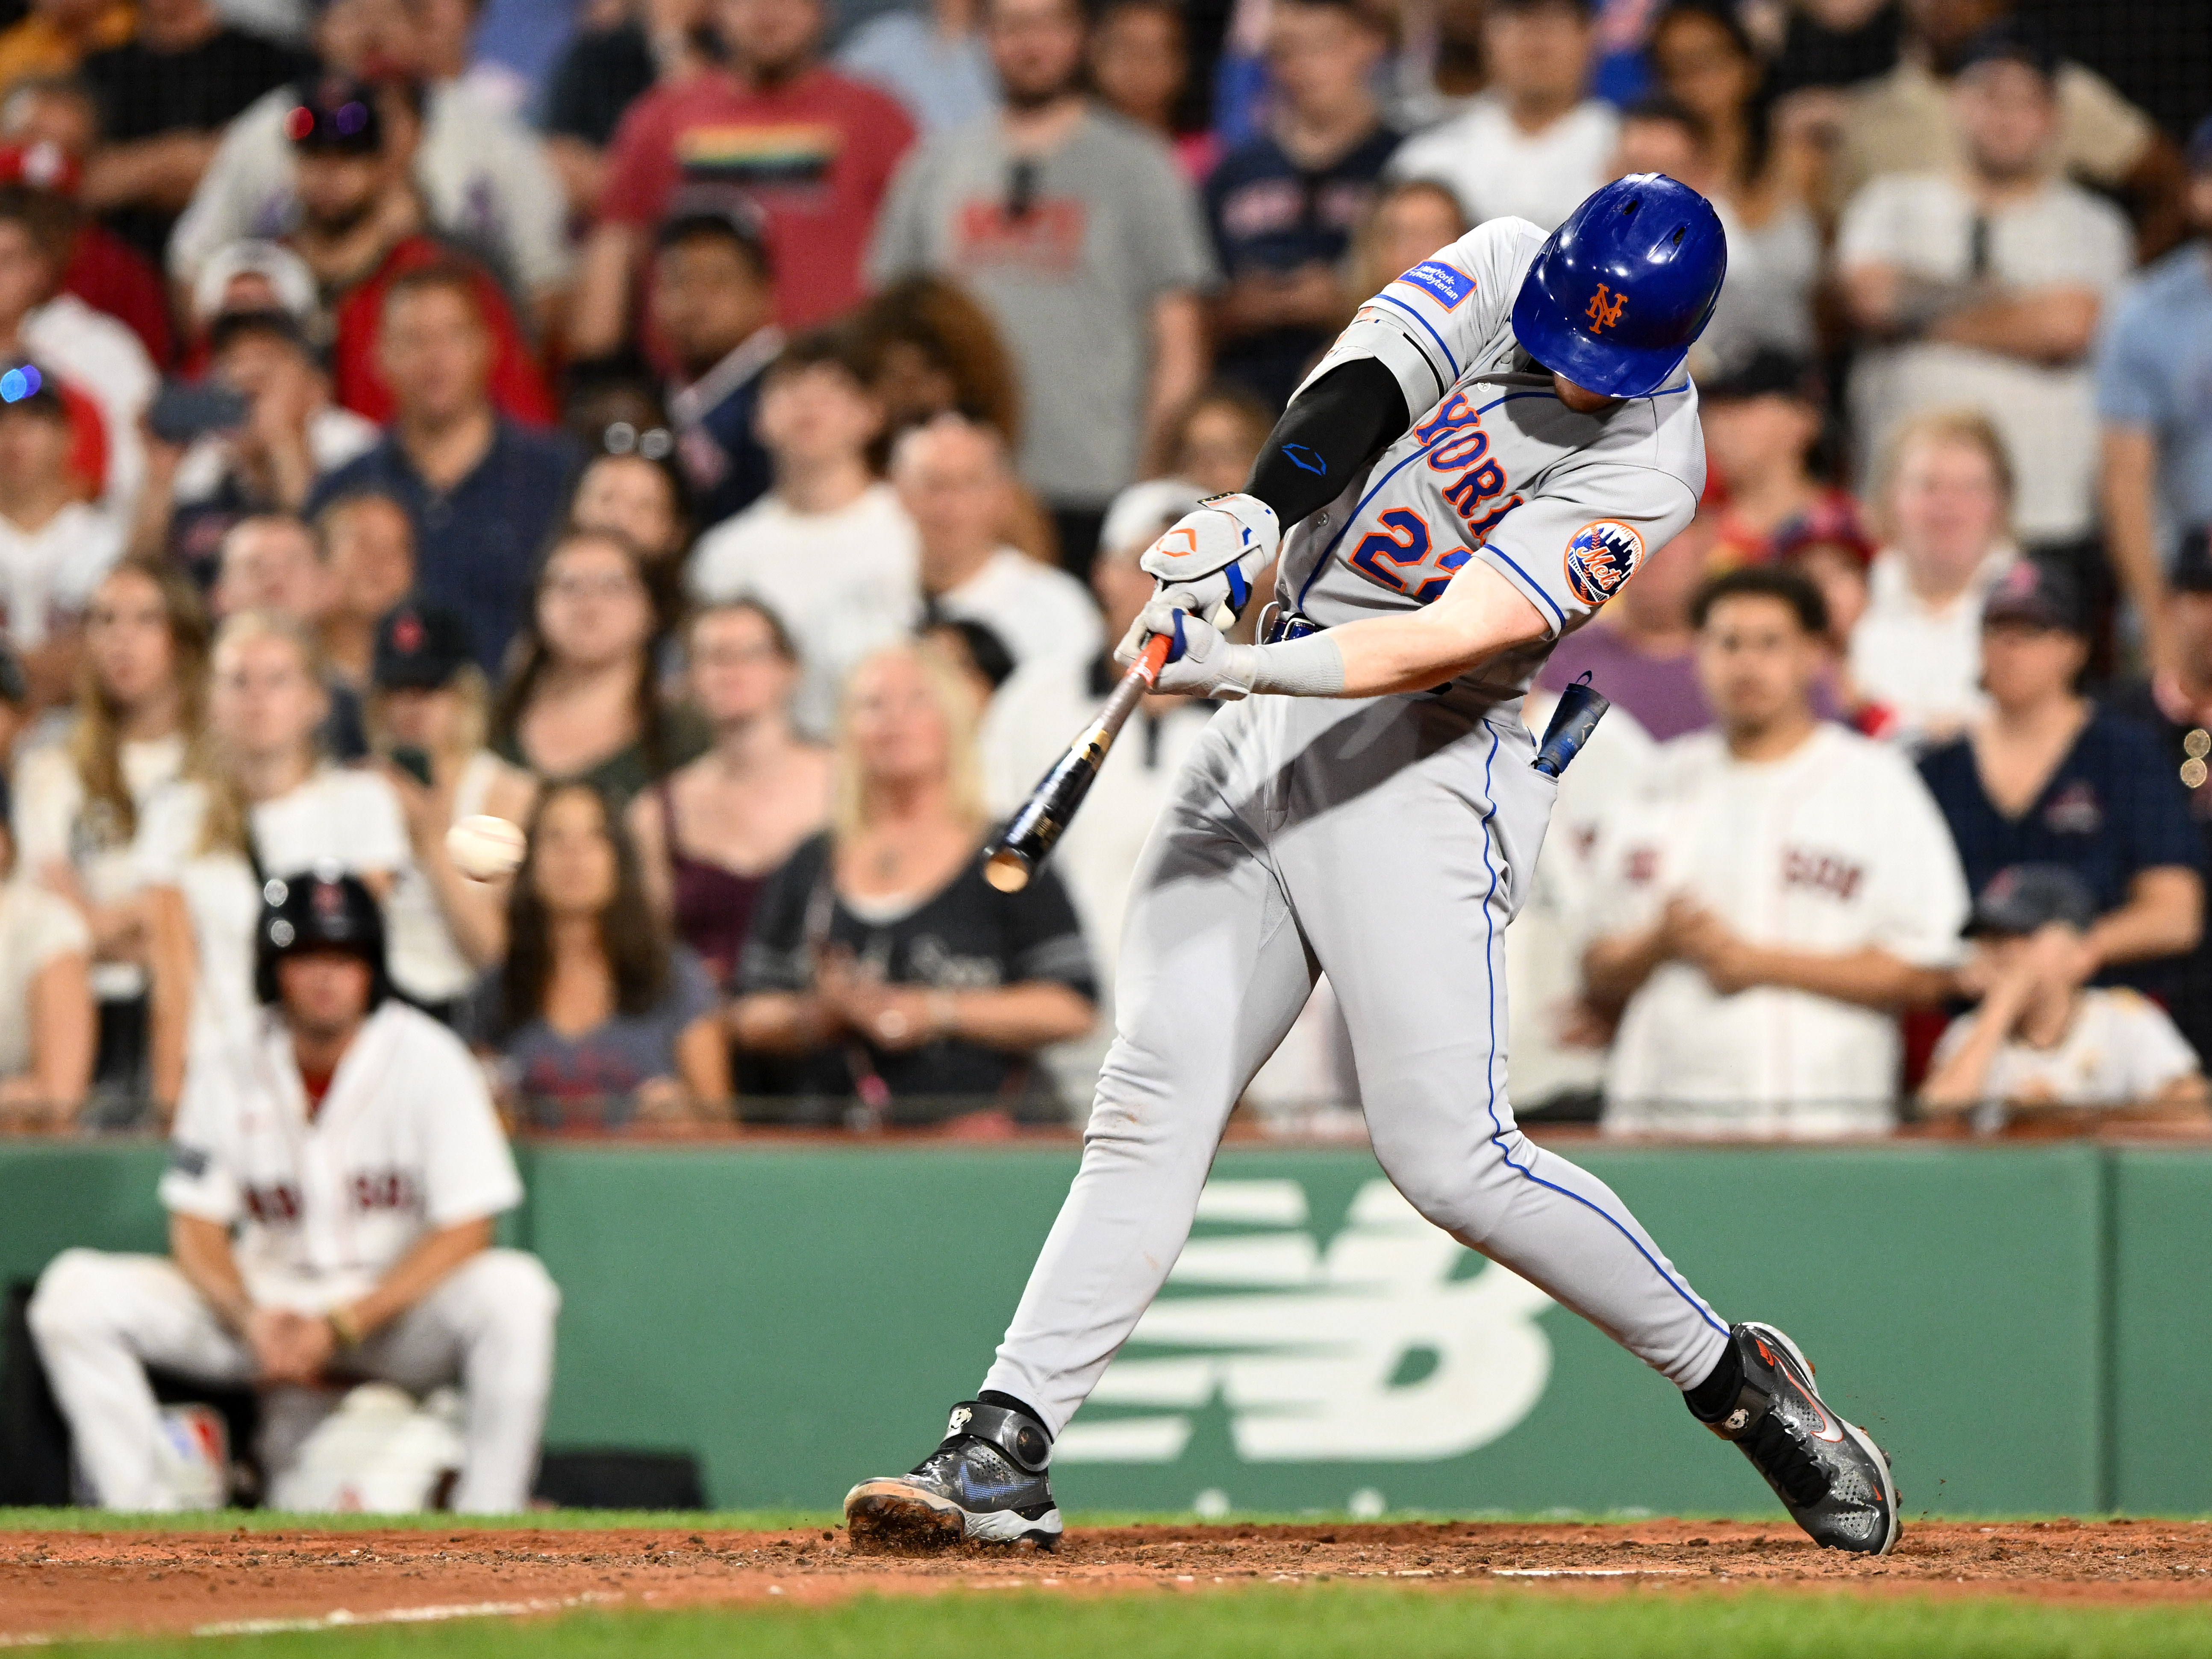 Mets lose series to Red Sox as season continues to slip away